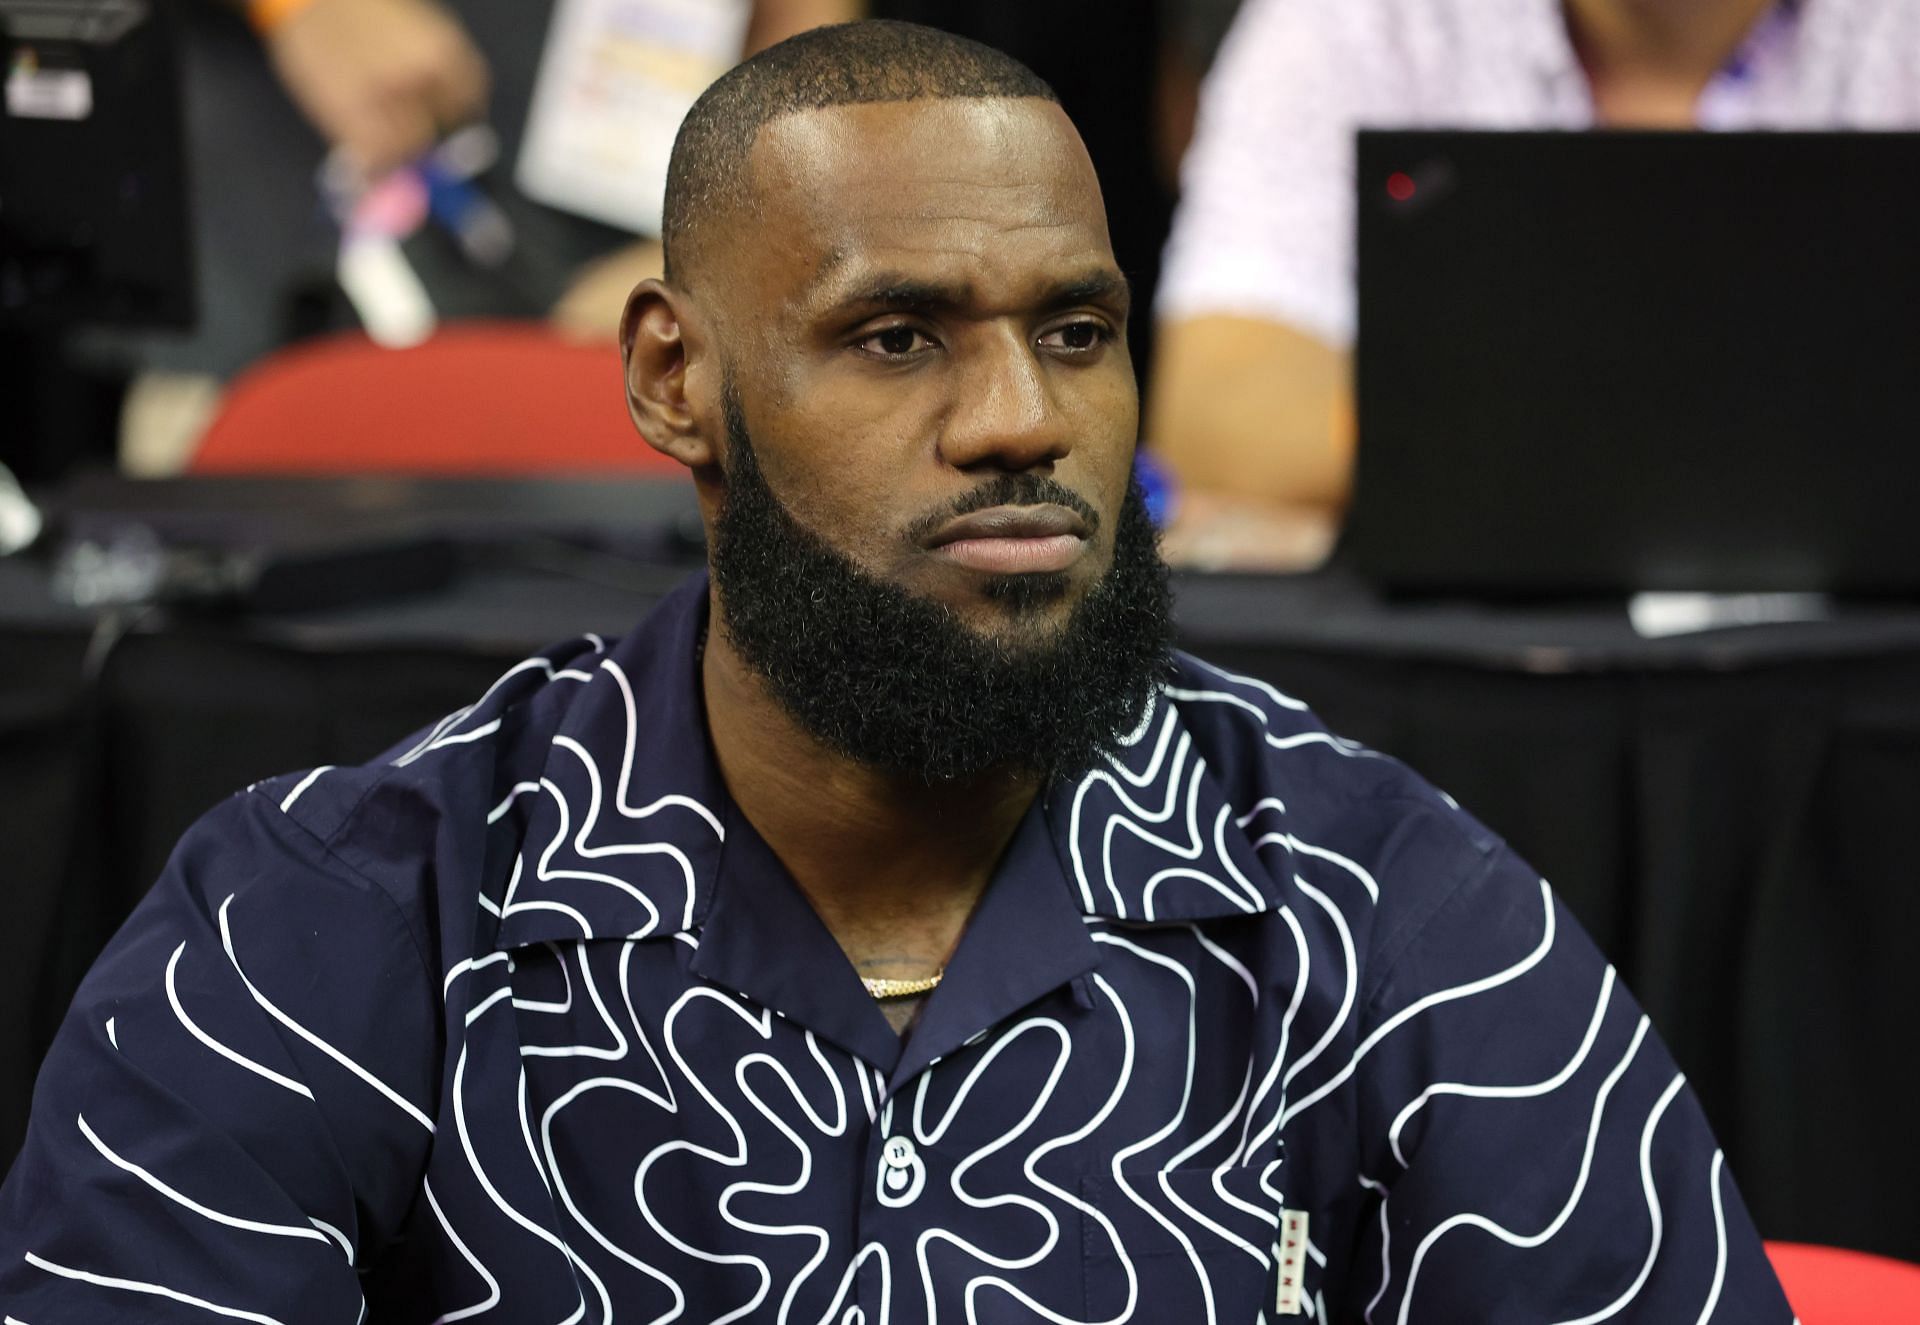 LeBron James of the LA Lakers attends a game at the 2022 NBA Summer League